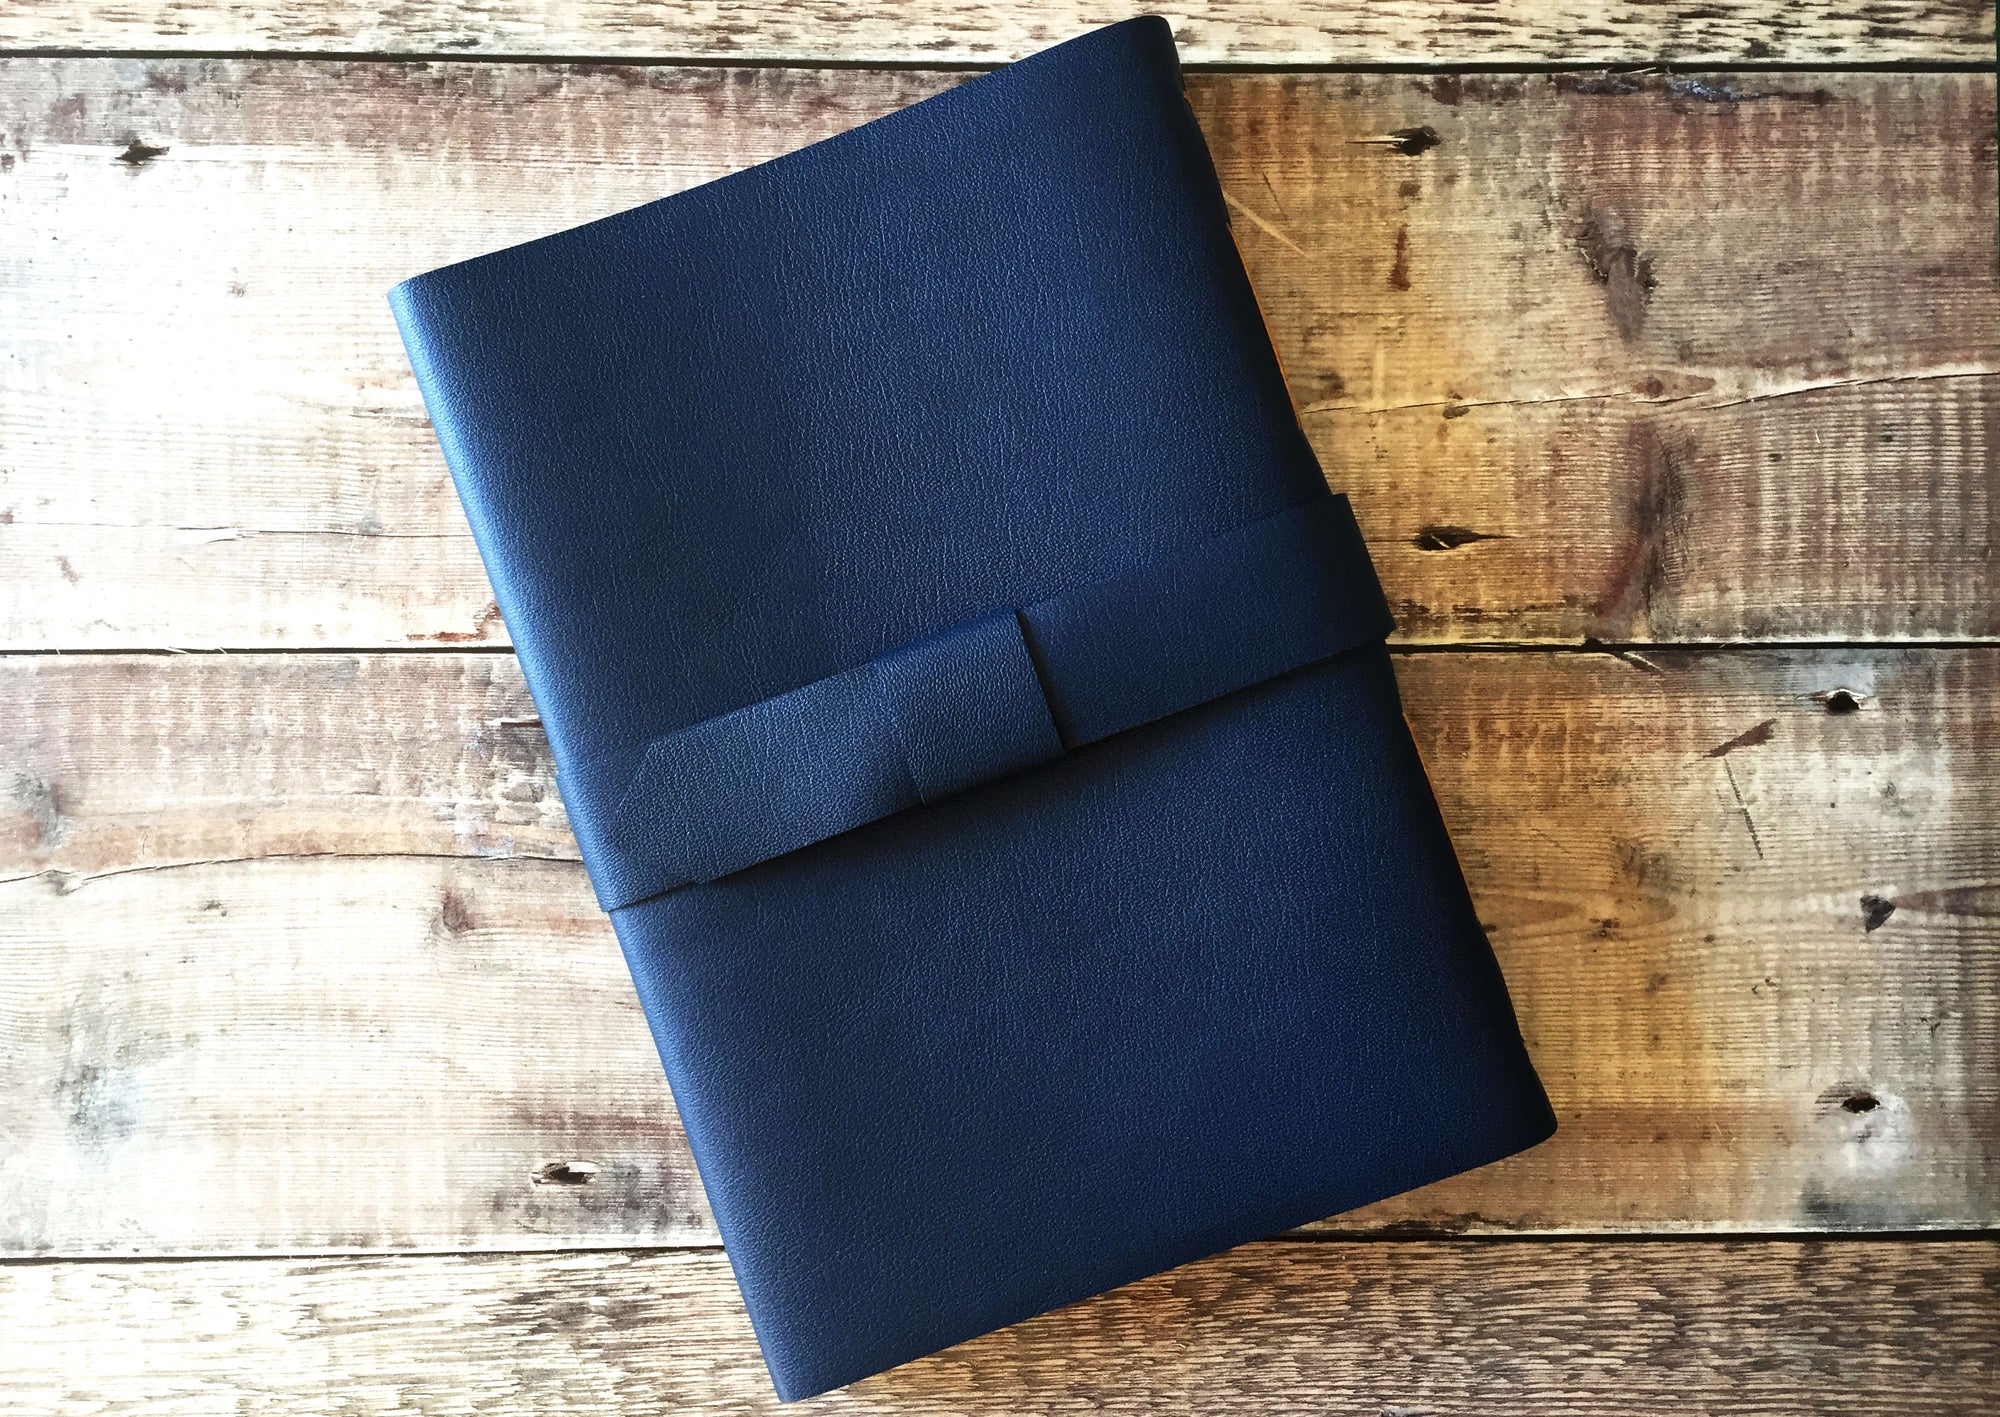 Back of Leather Journal in Navy Blue, bound by hand with strap and buckle to close.